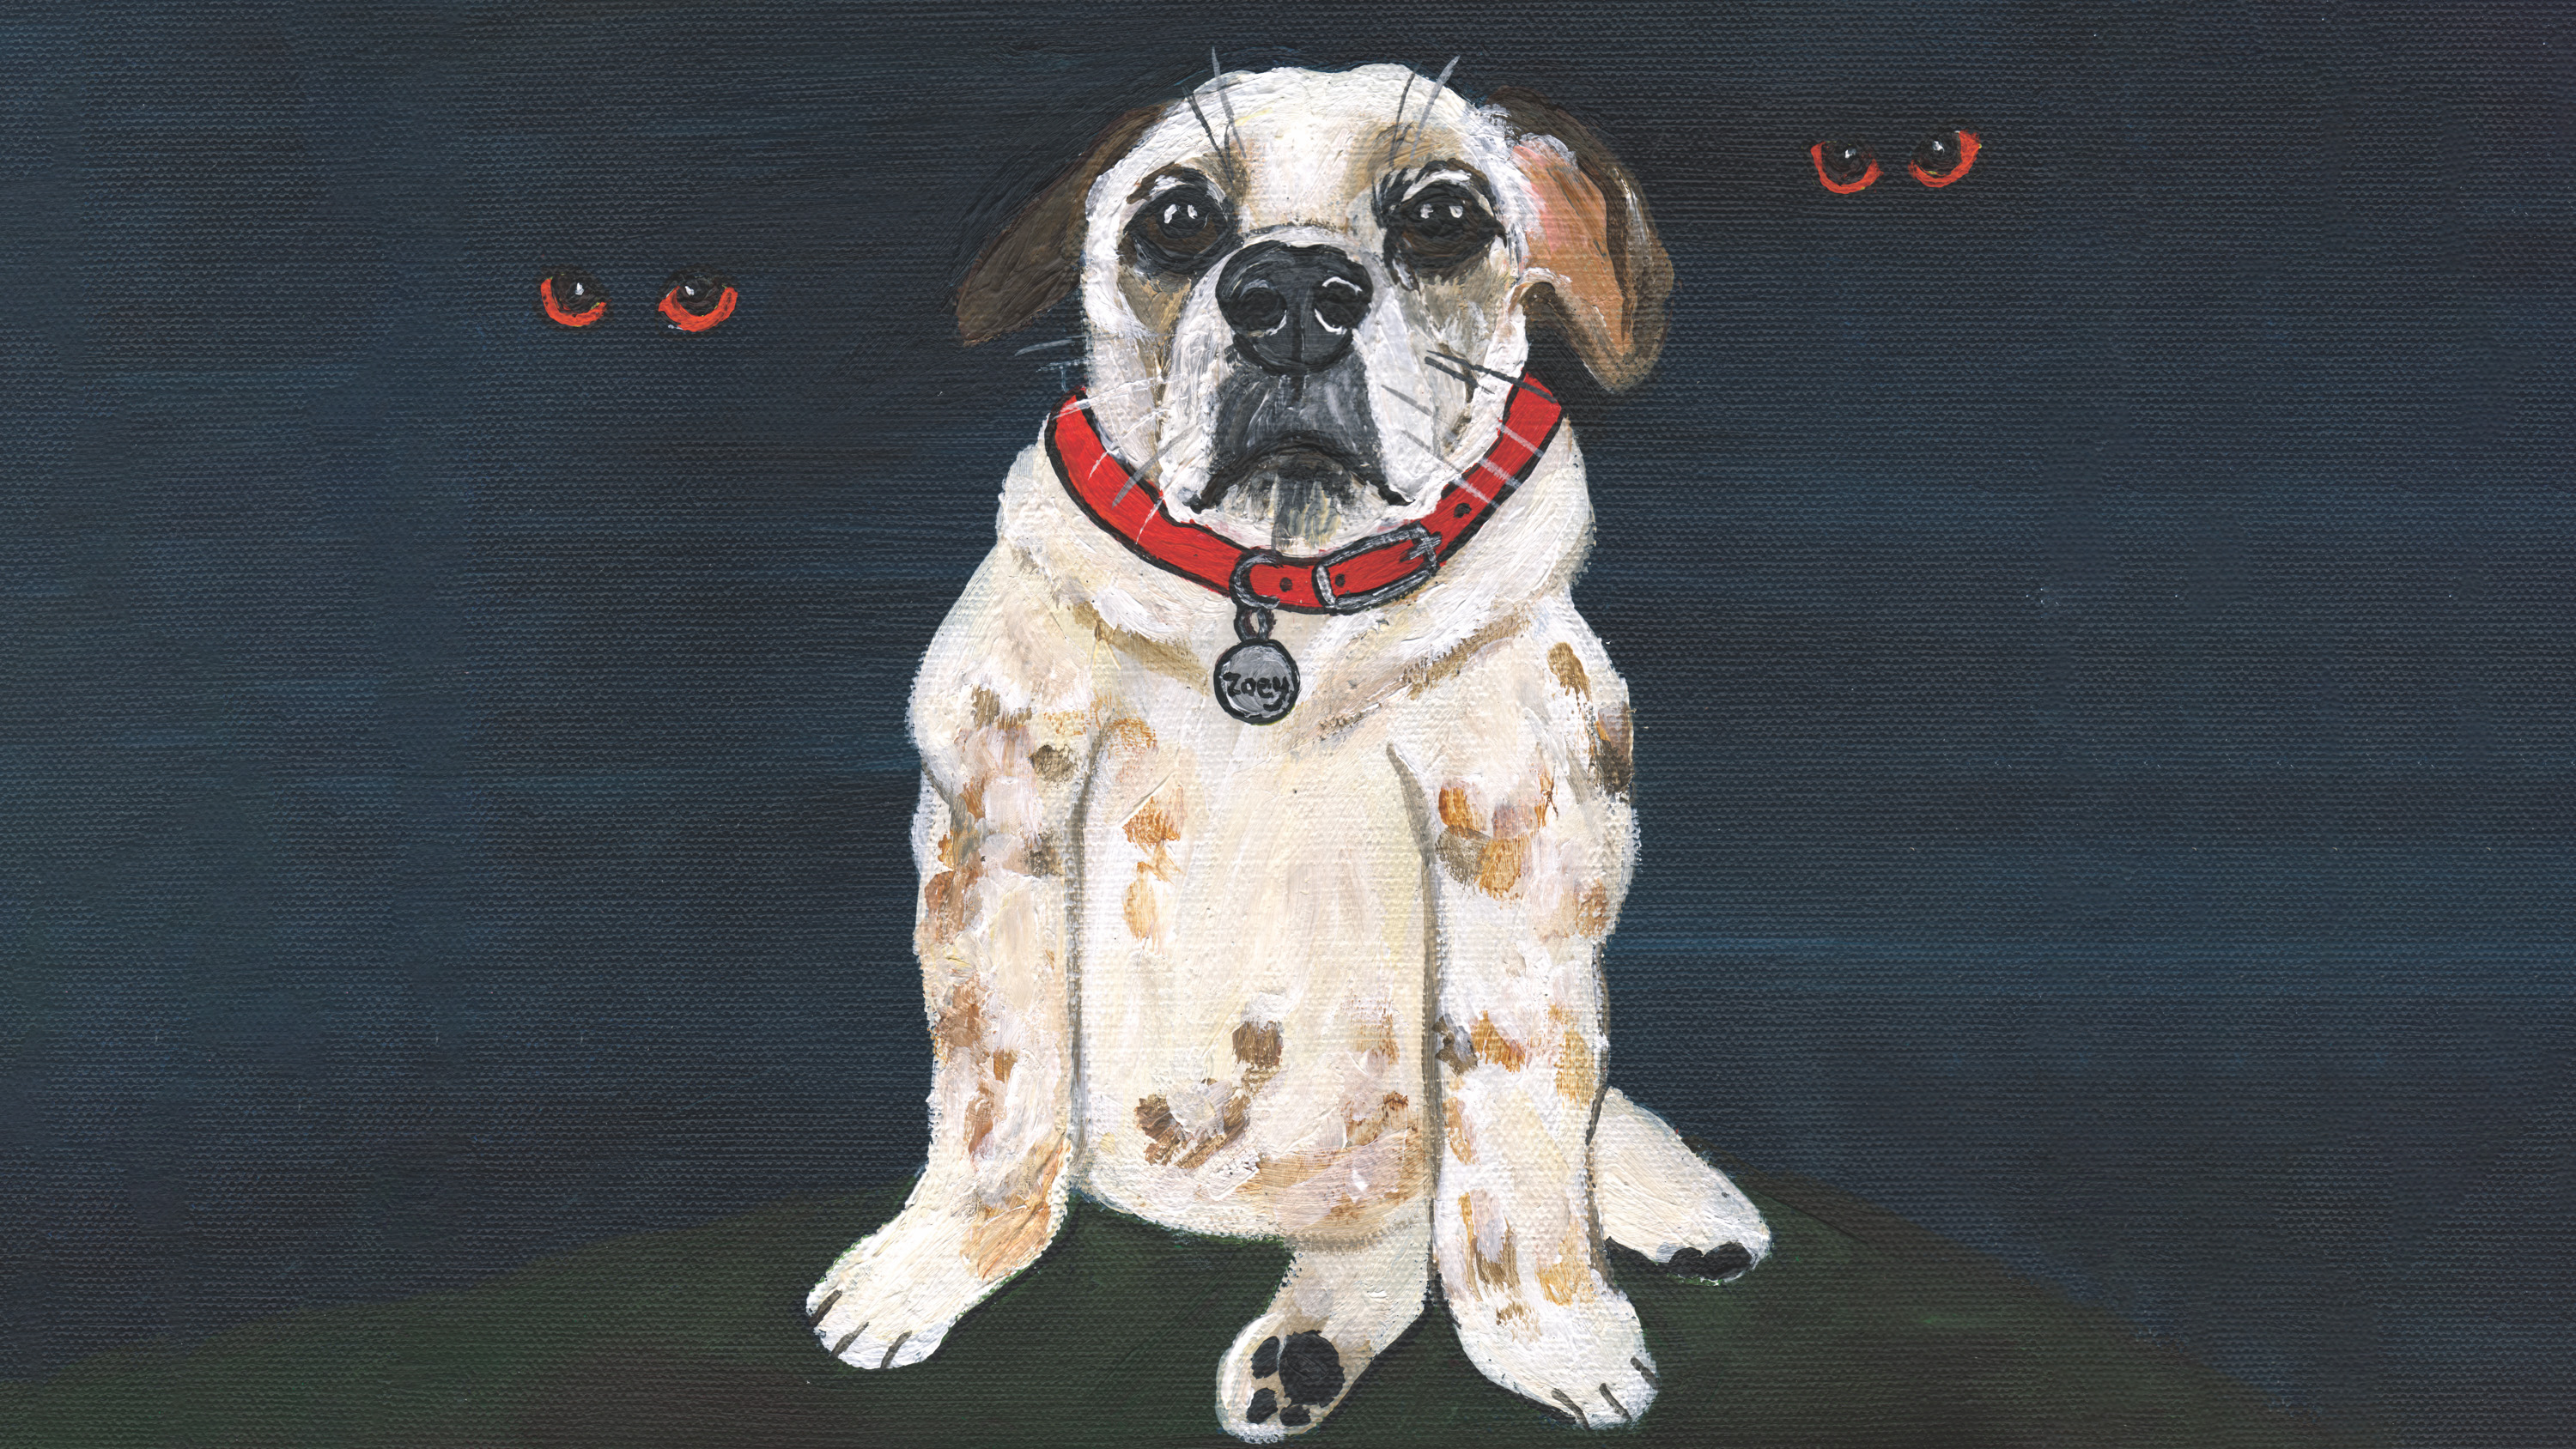 painting of dog with eyes in the darkness behind